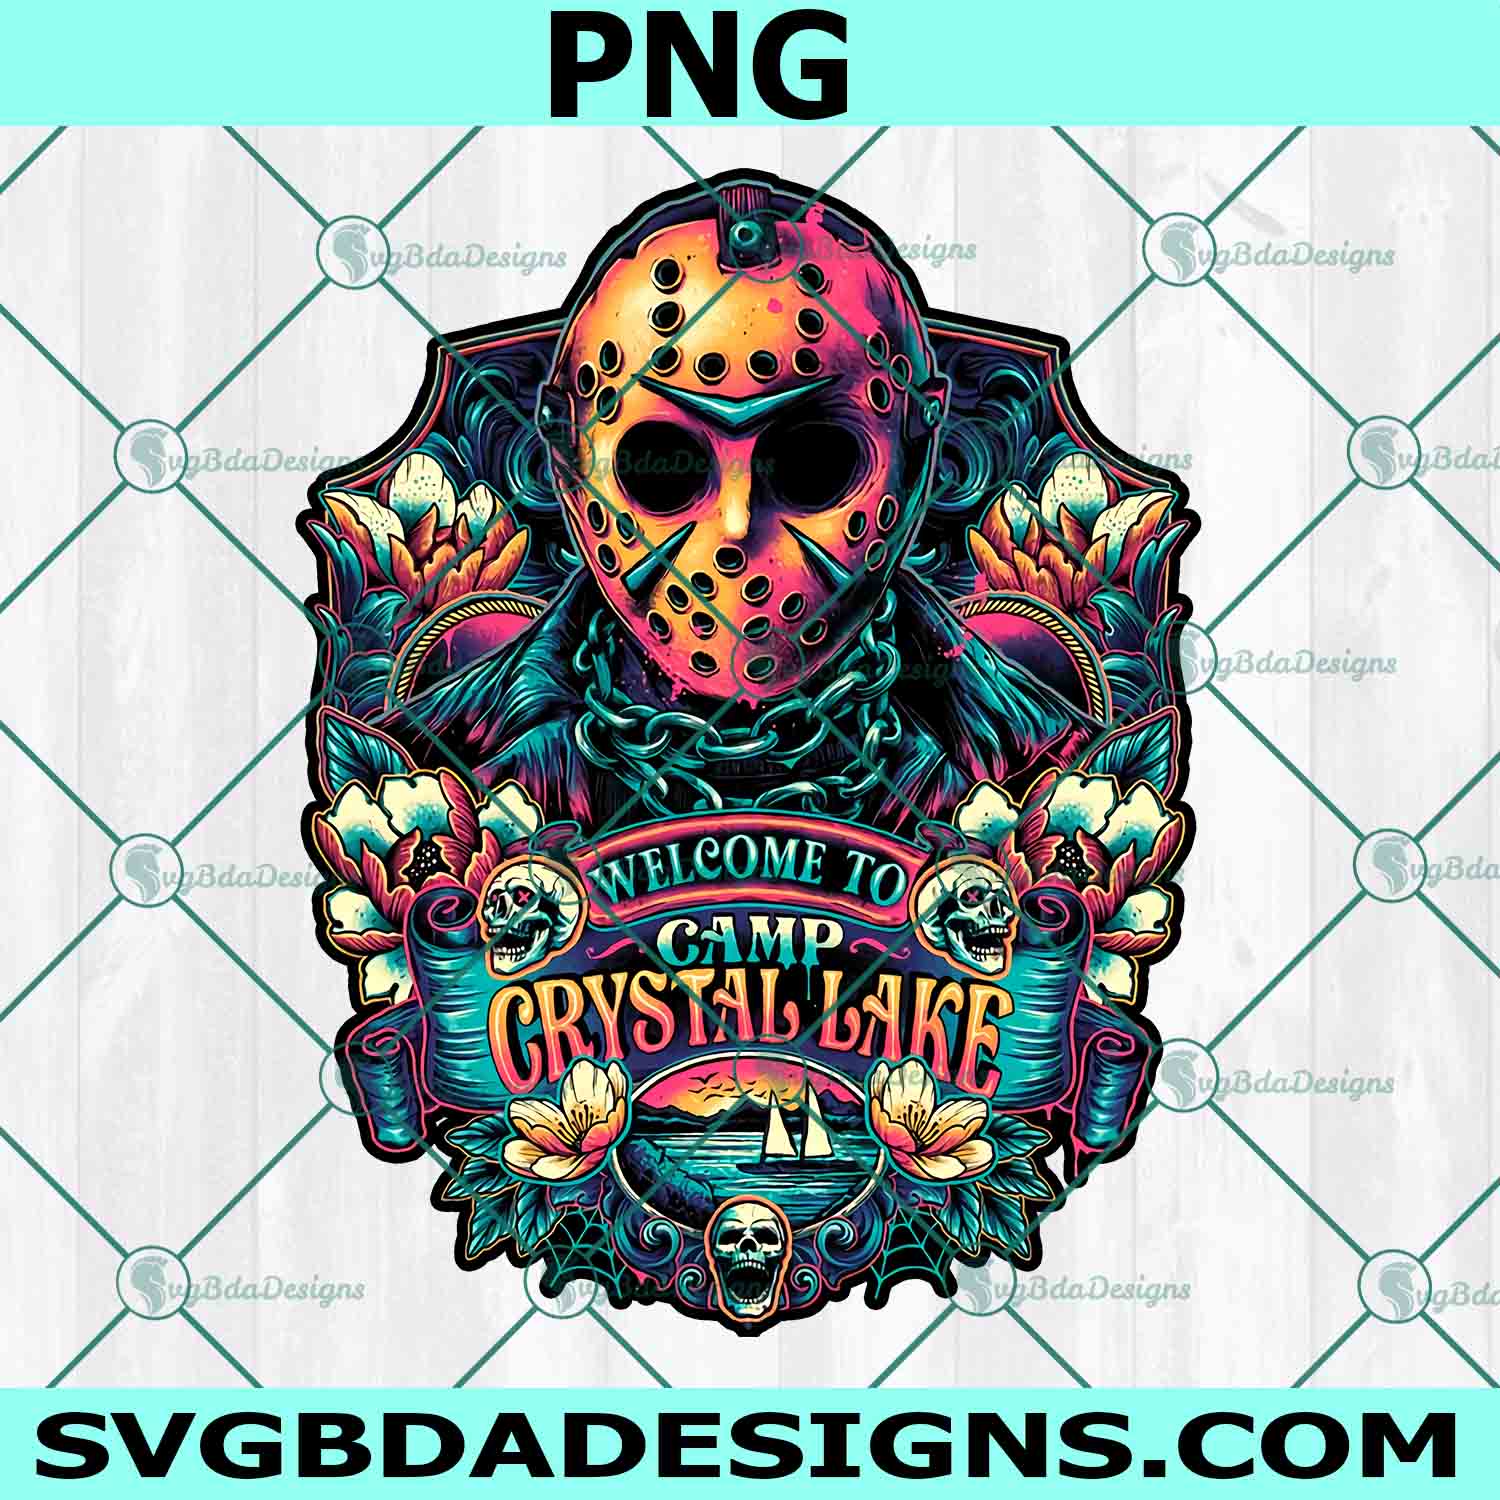 Welcome To Camp Crystal Lake Png, Jason Voorhees Png, Friday the 13th Png, Horror Movies Png, Halloween Png, Horror Character Png, File For Cricut